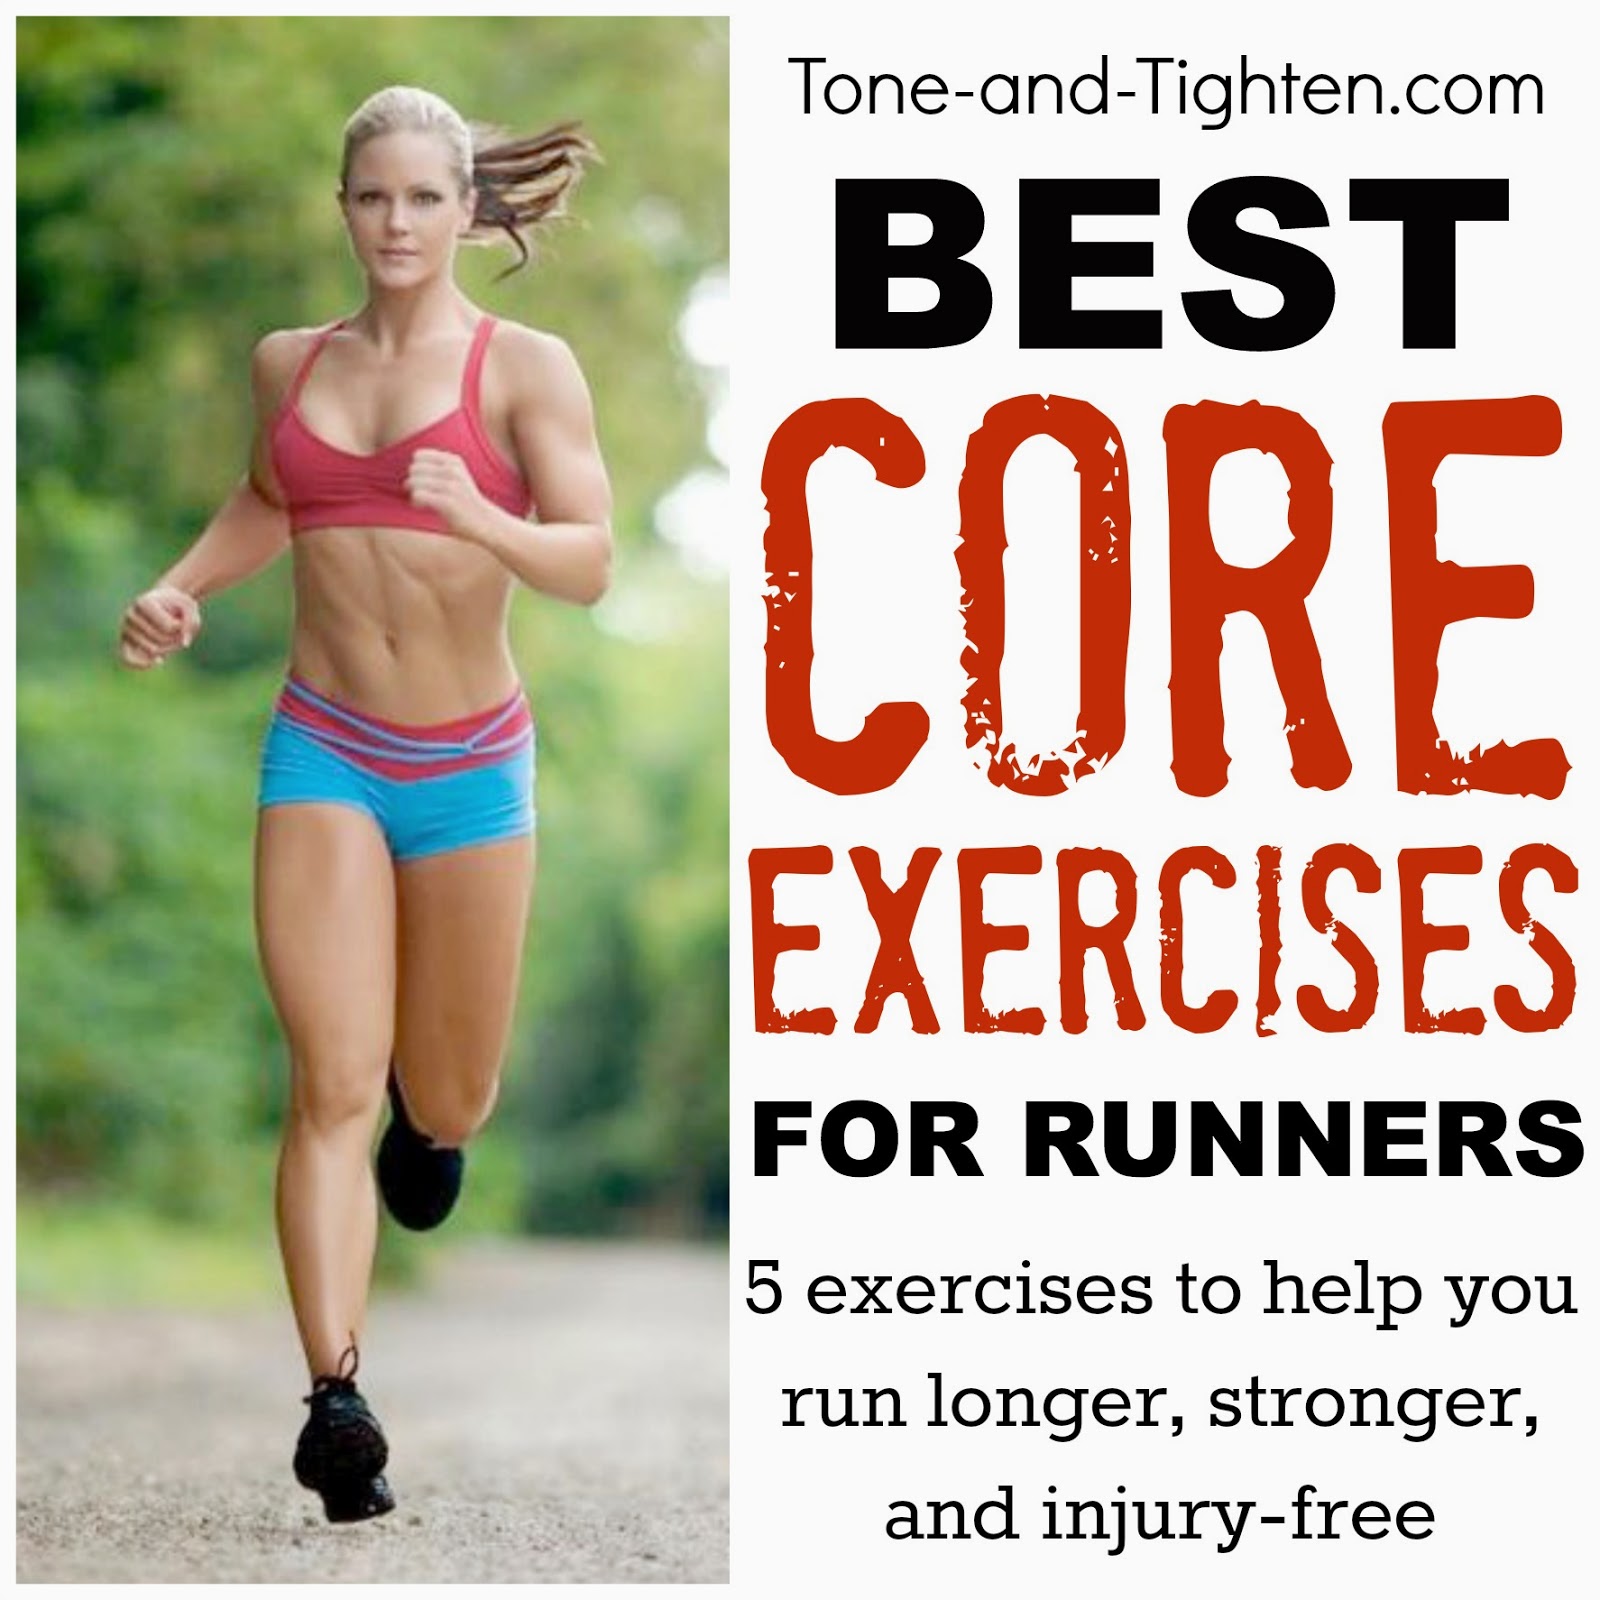 Best Exercises For Runners – How To Train Your Core For Your Next Race